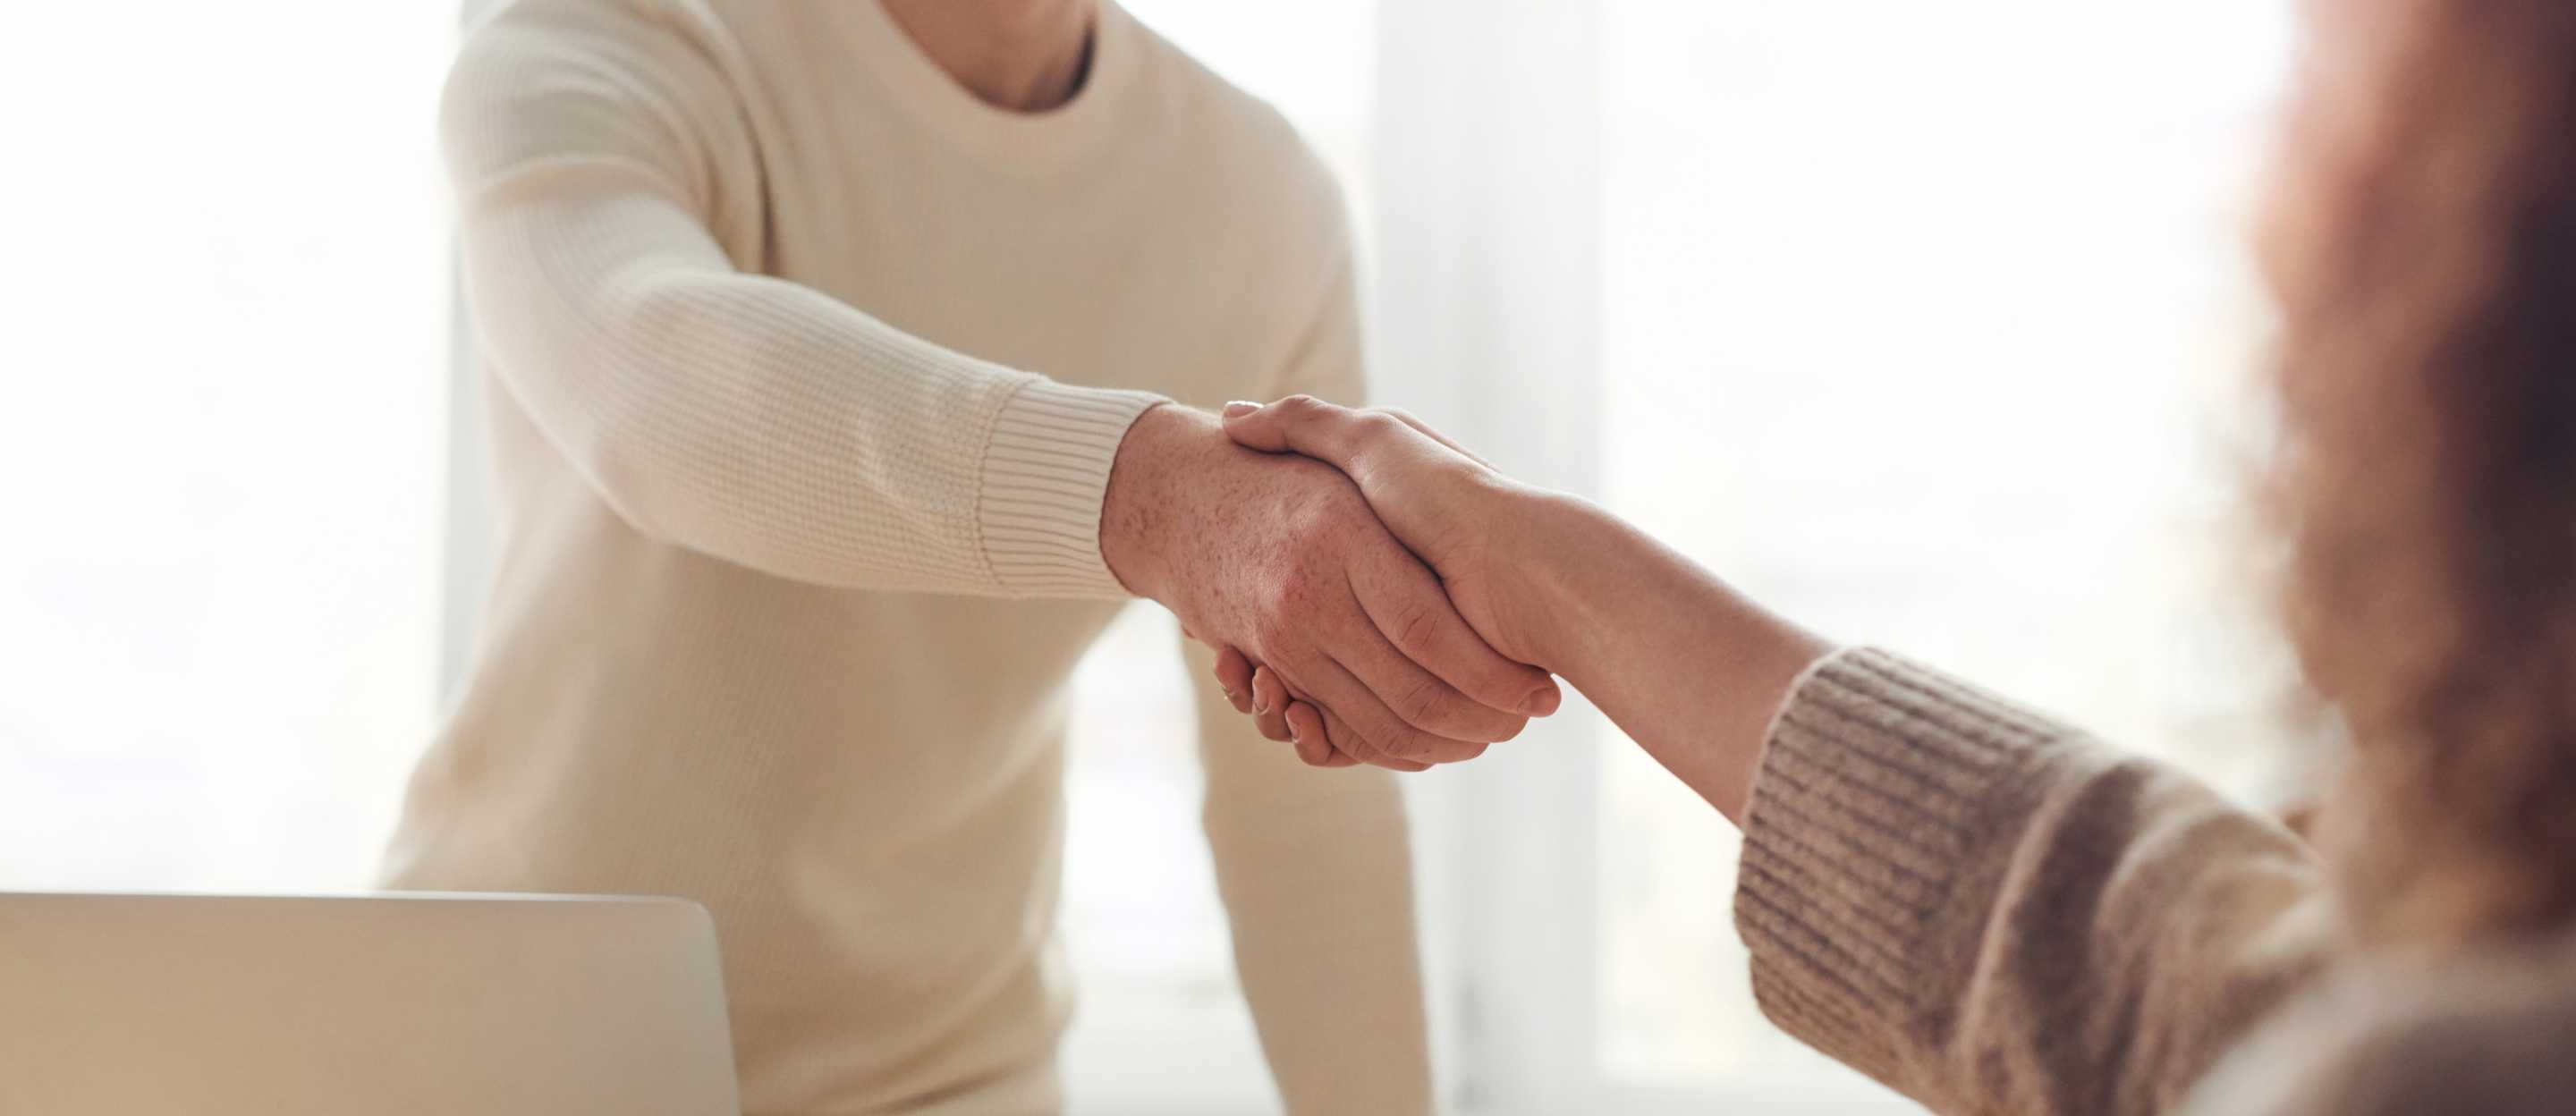 Two people shake hands because they made a business deal with each other.